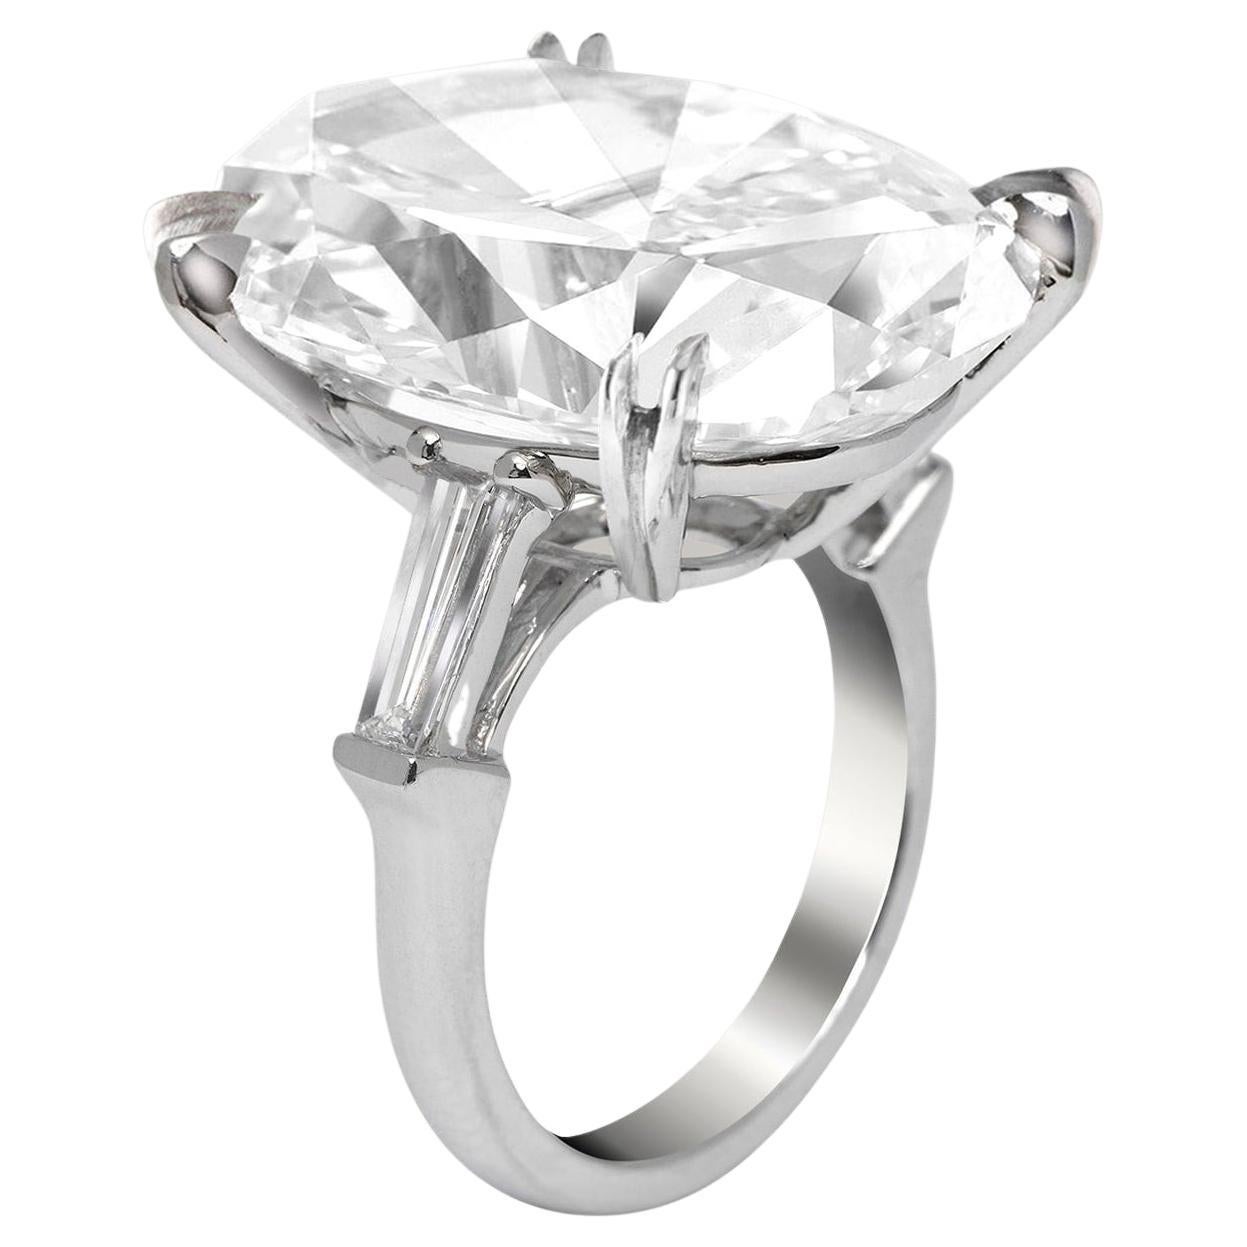 GIA Certified 7 Carat D Flawless Oval Diamond Ring